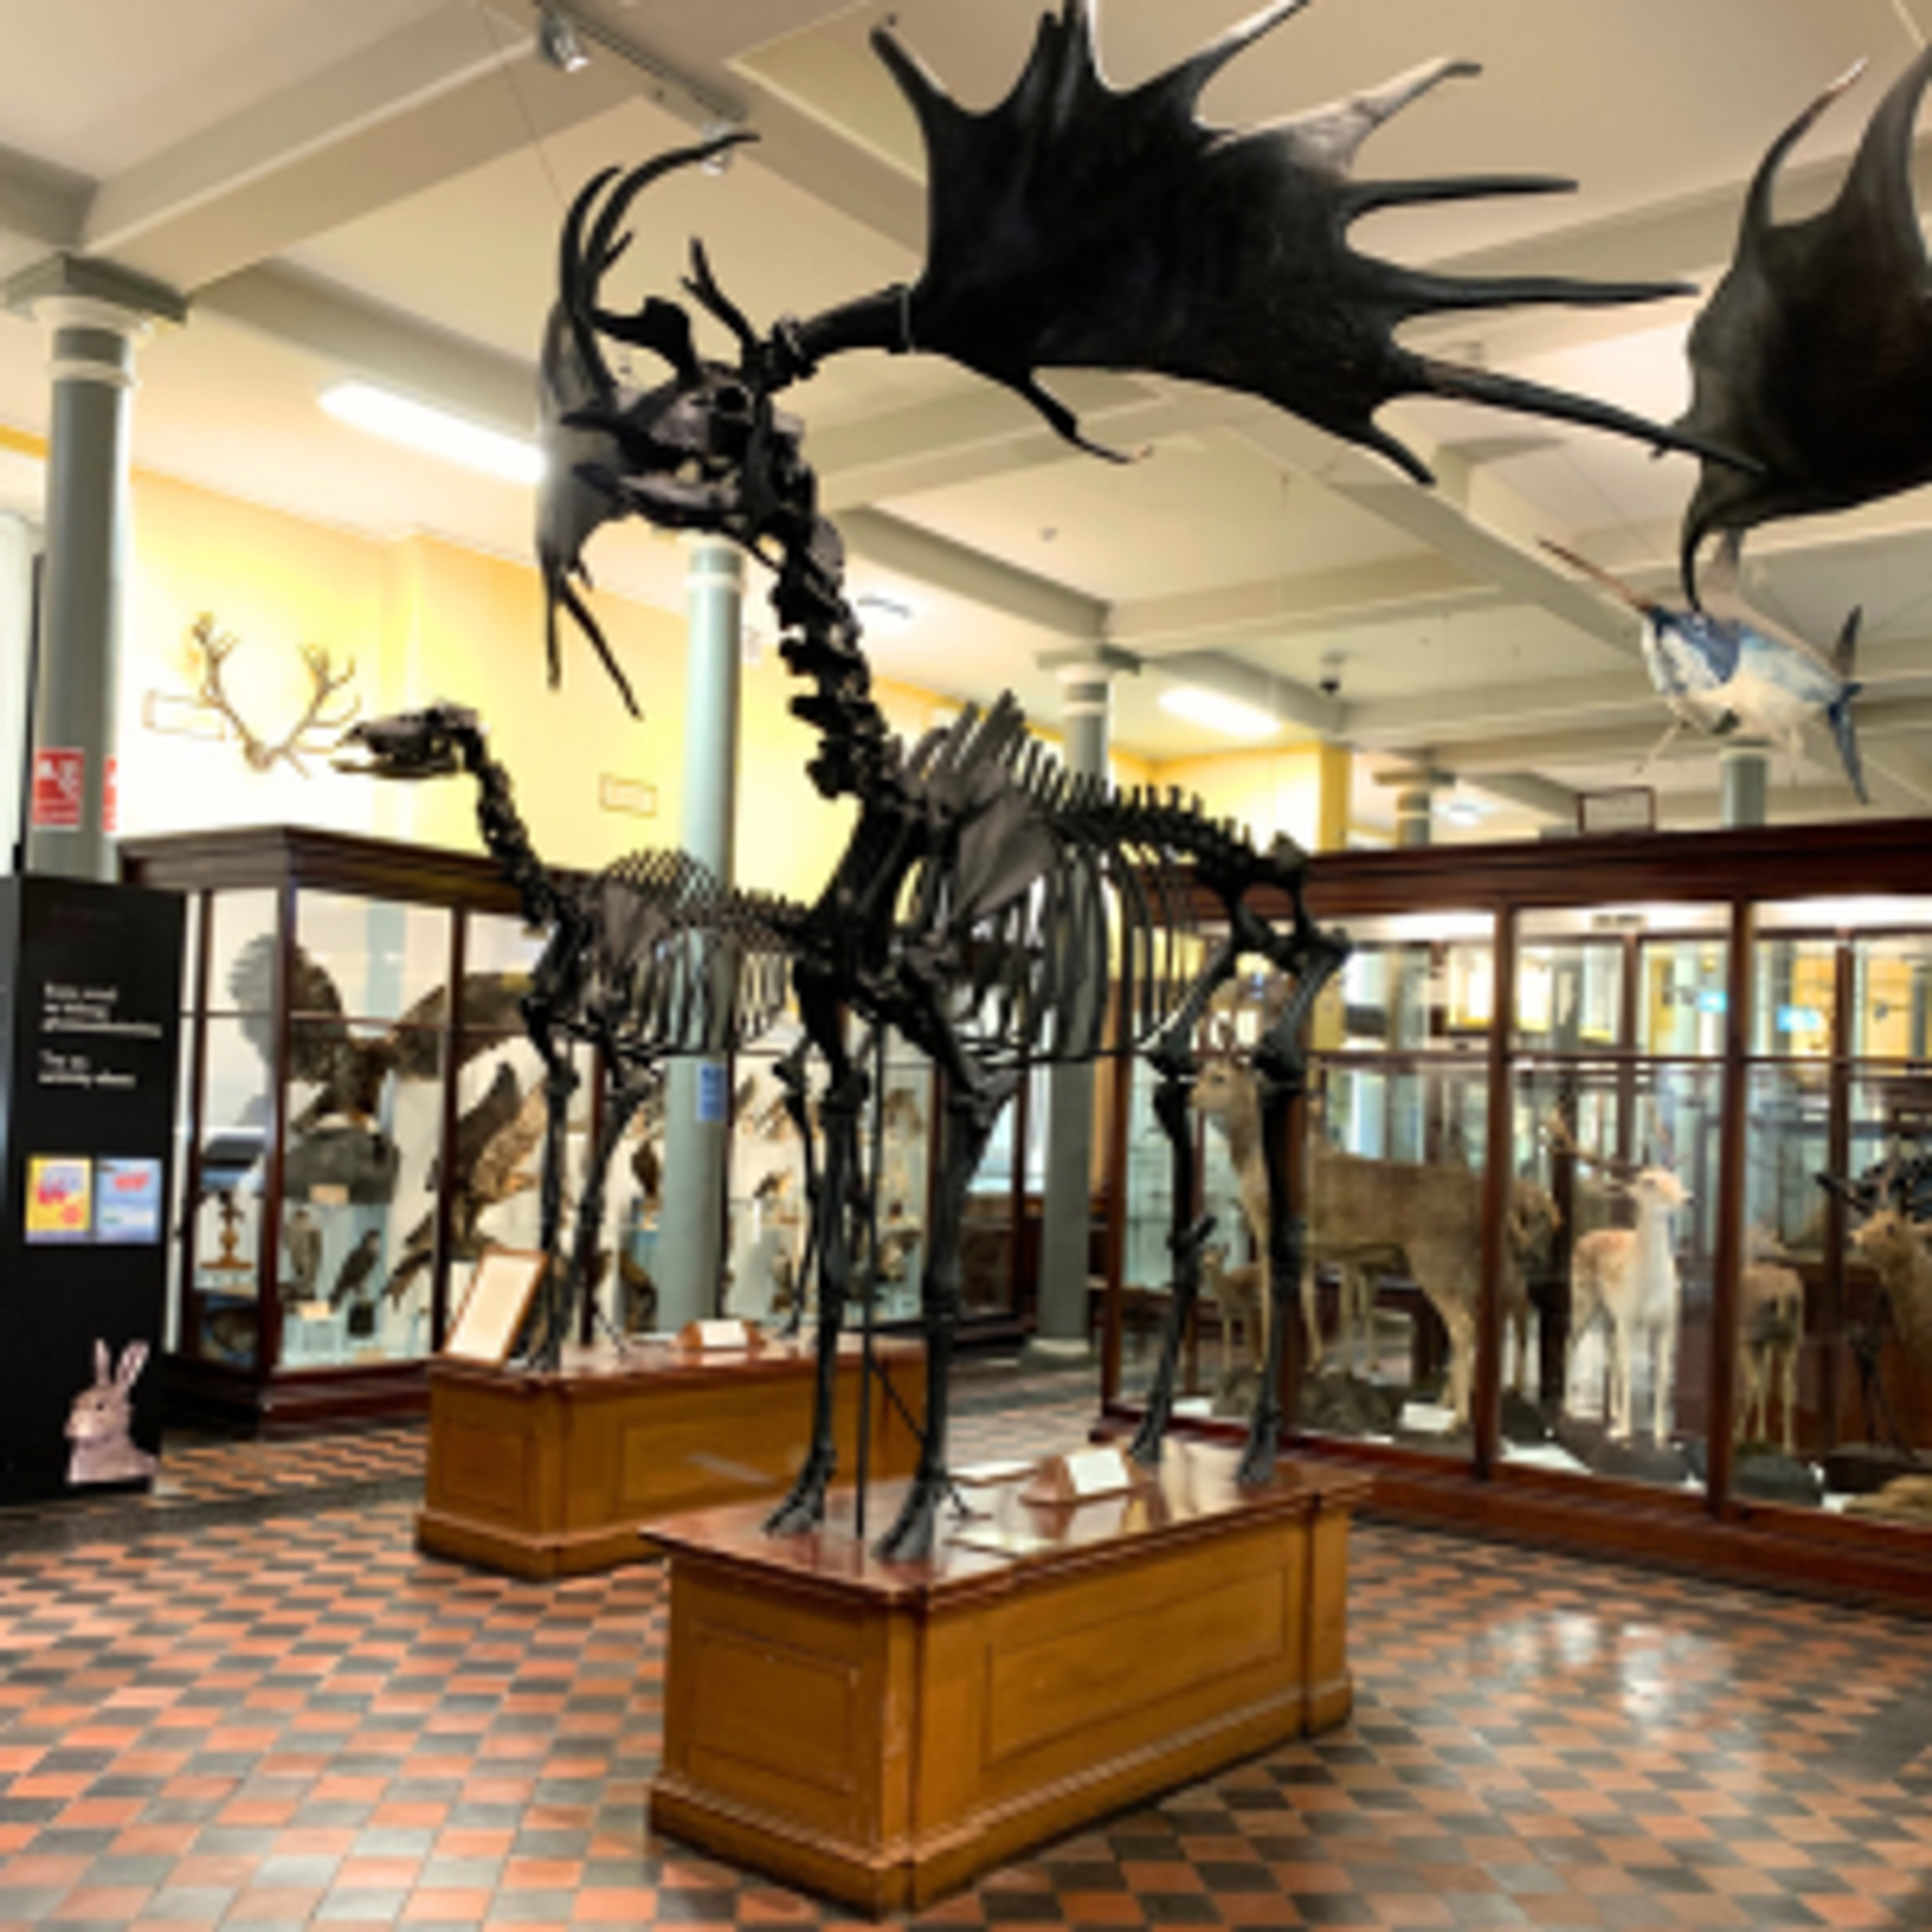 The Giant Deer fossil inside the Dublin Natural History Museum